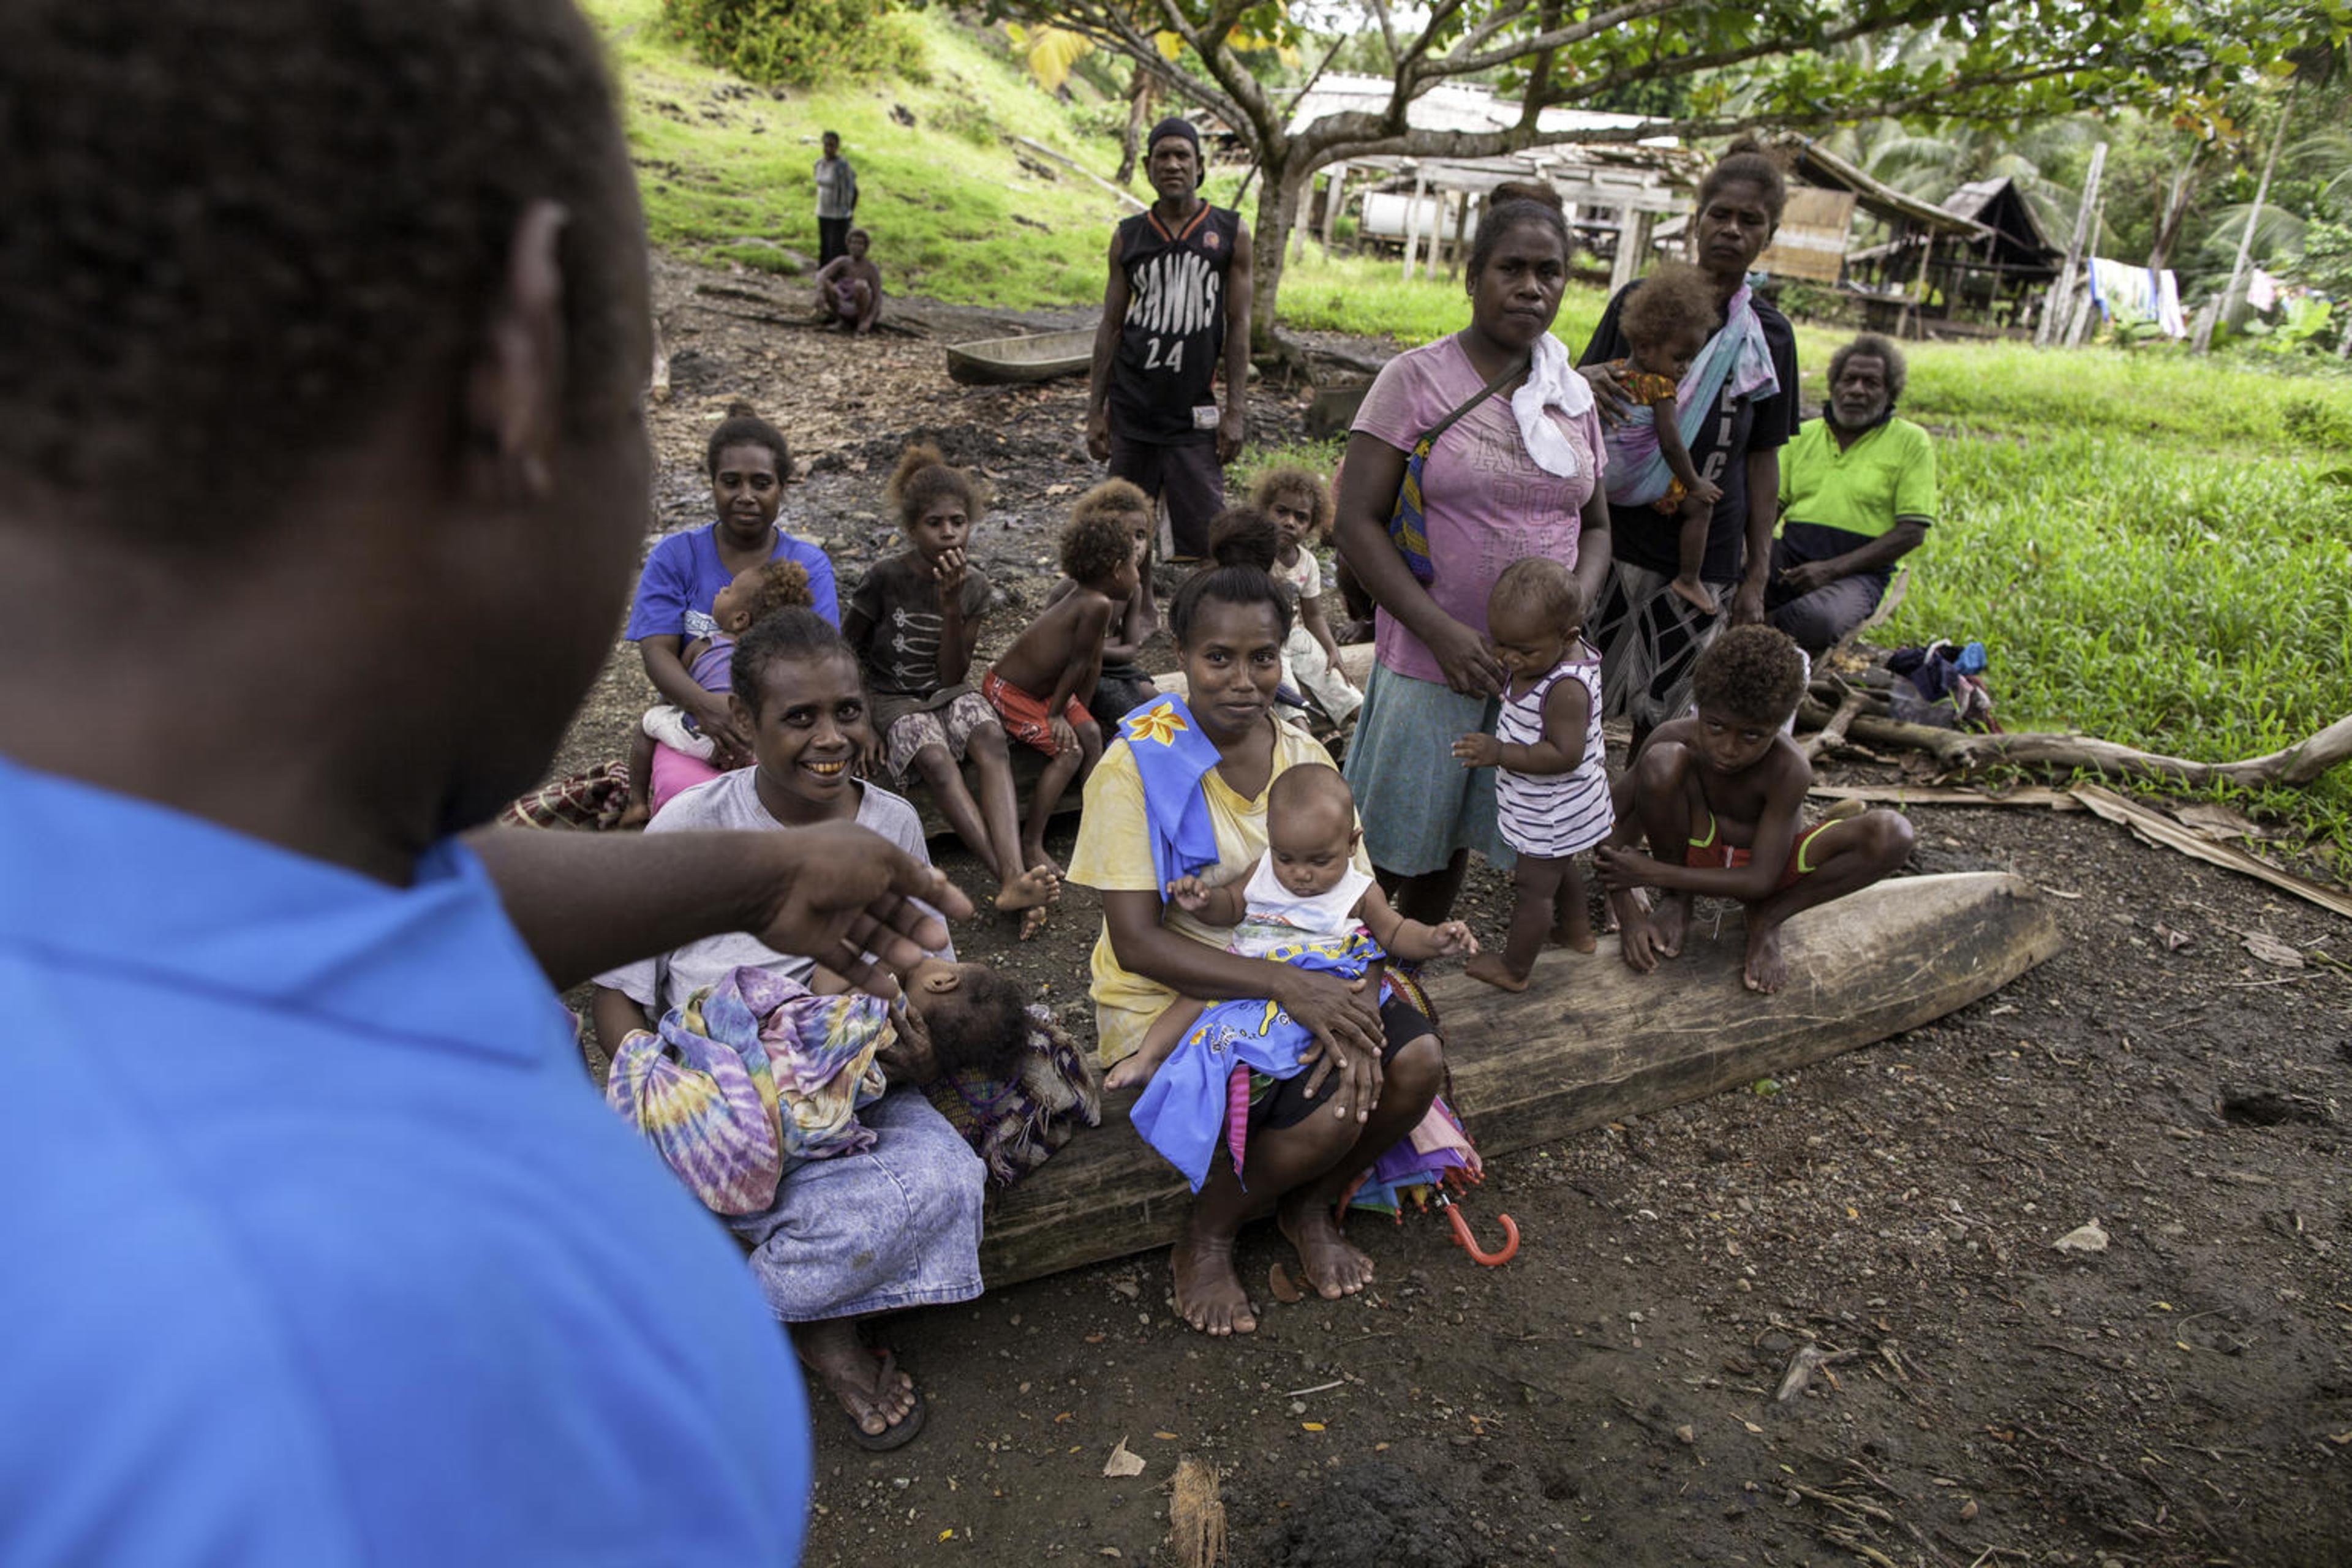 UNICEF Health Worker Paul Maesiala gives nutrition advice to a community in the Solomon Islands